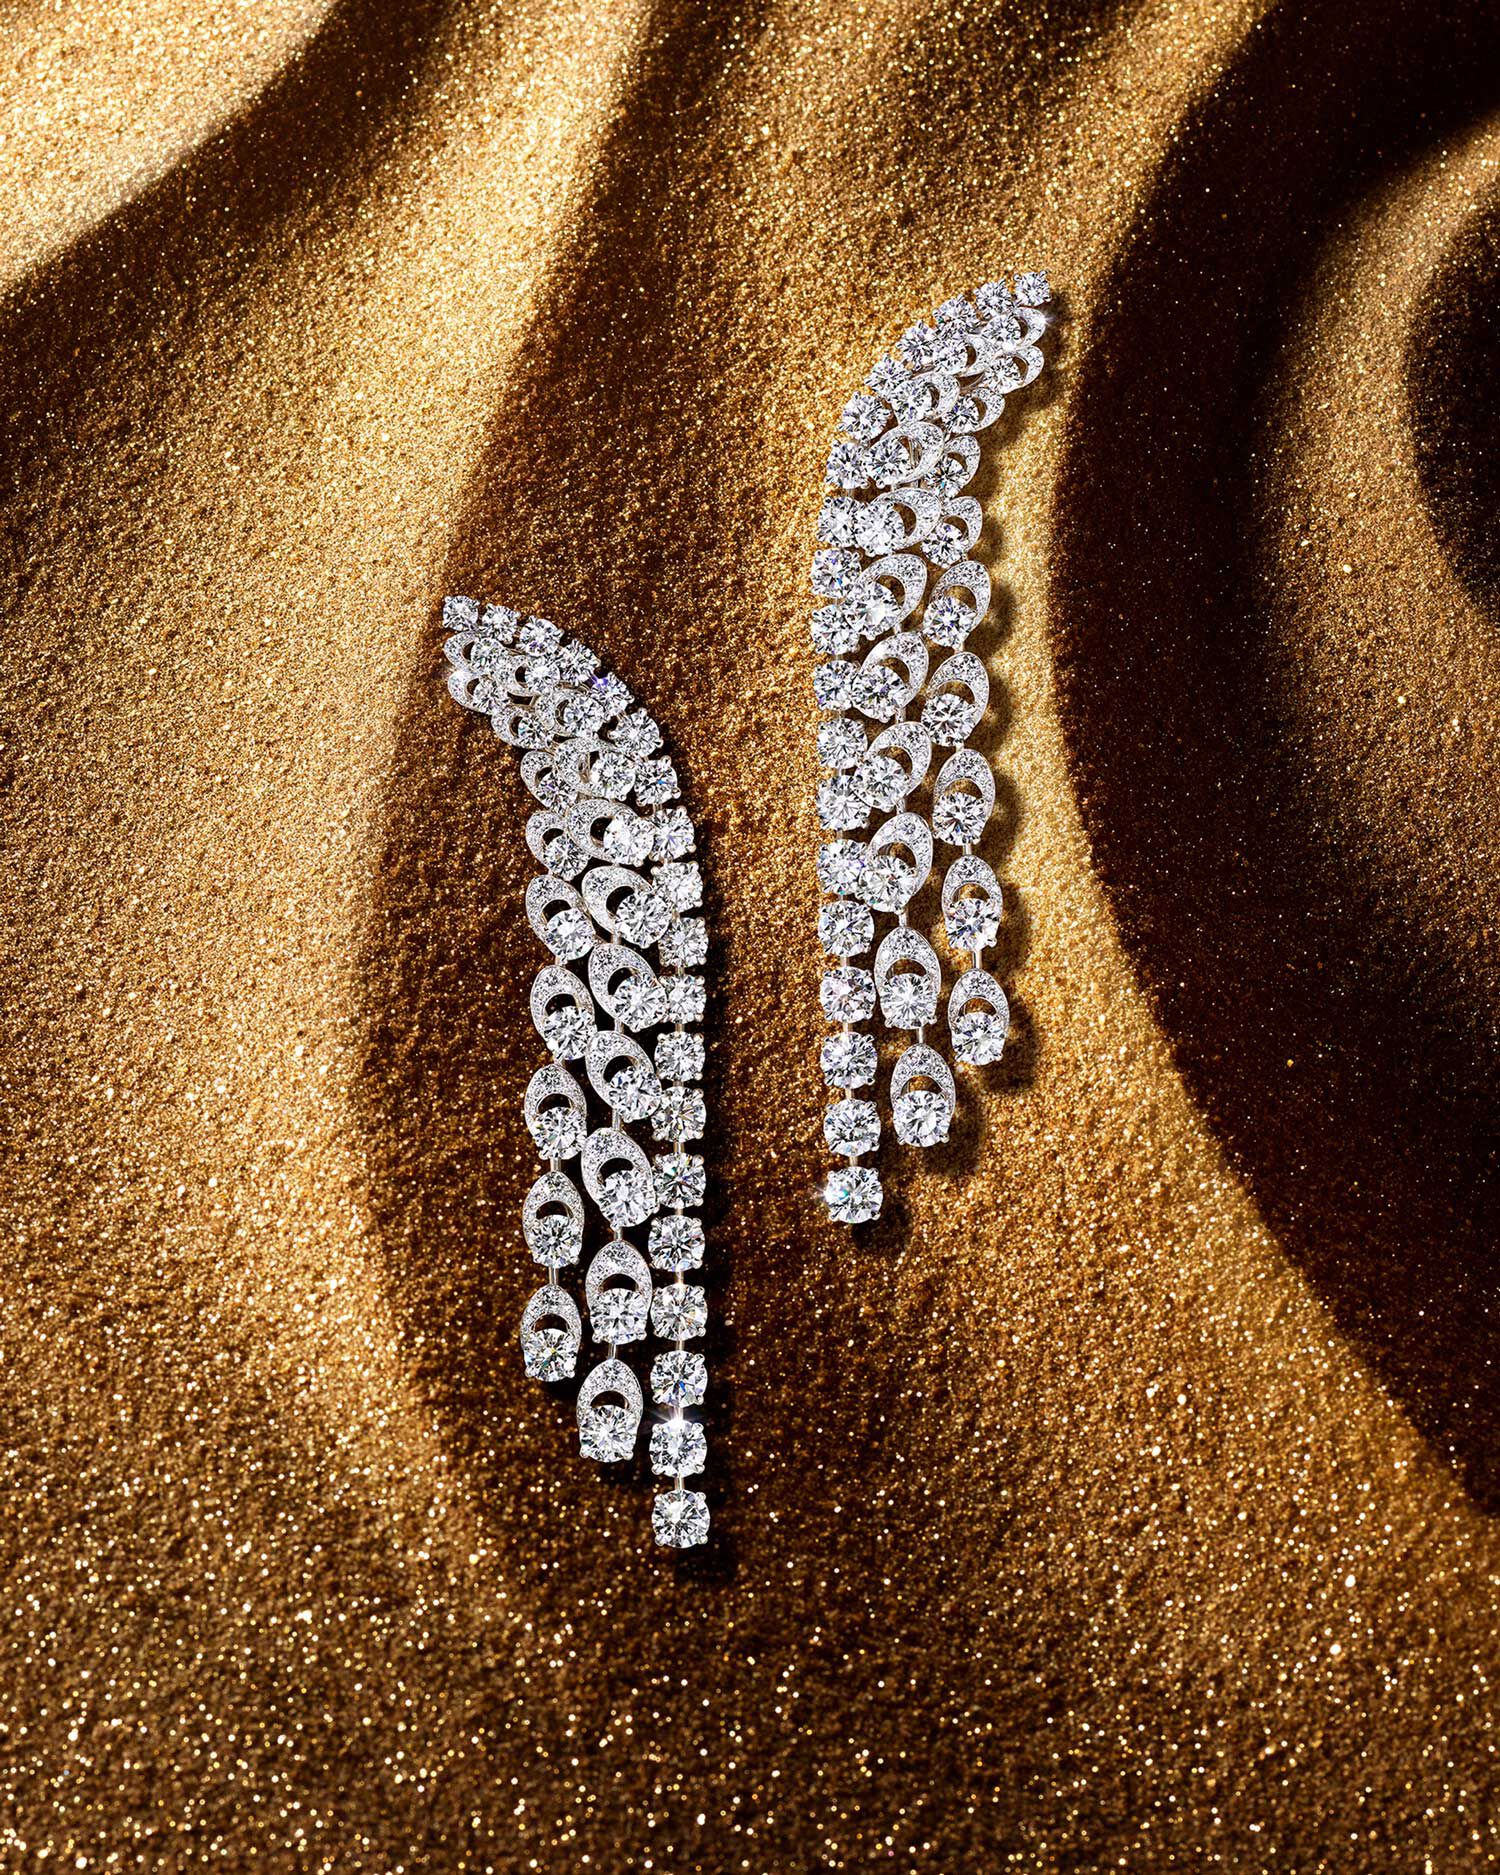 The abstract Graff Gateway motif is showcased in a pair of diamond earrings